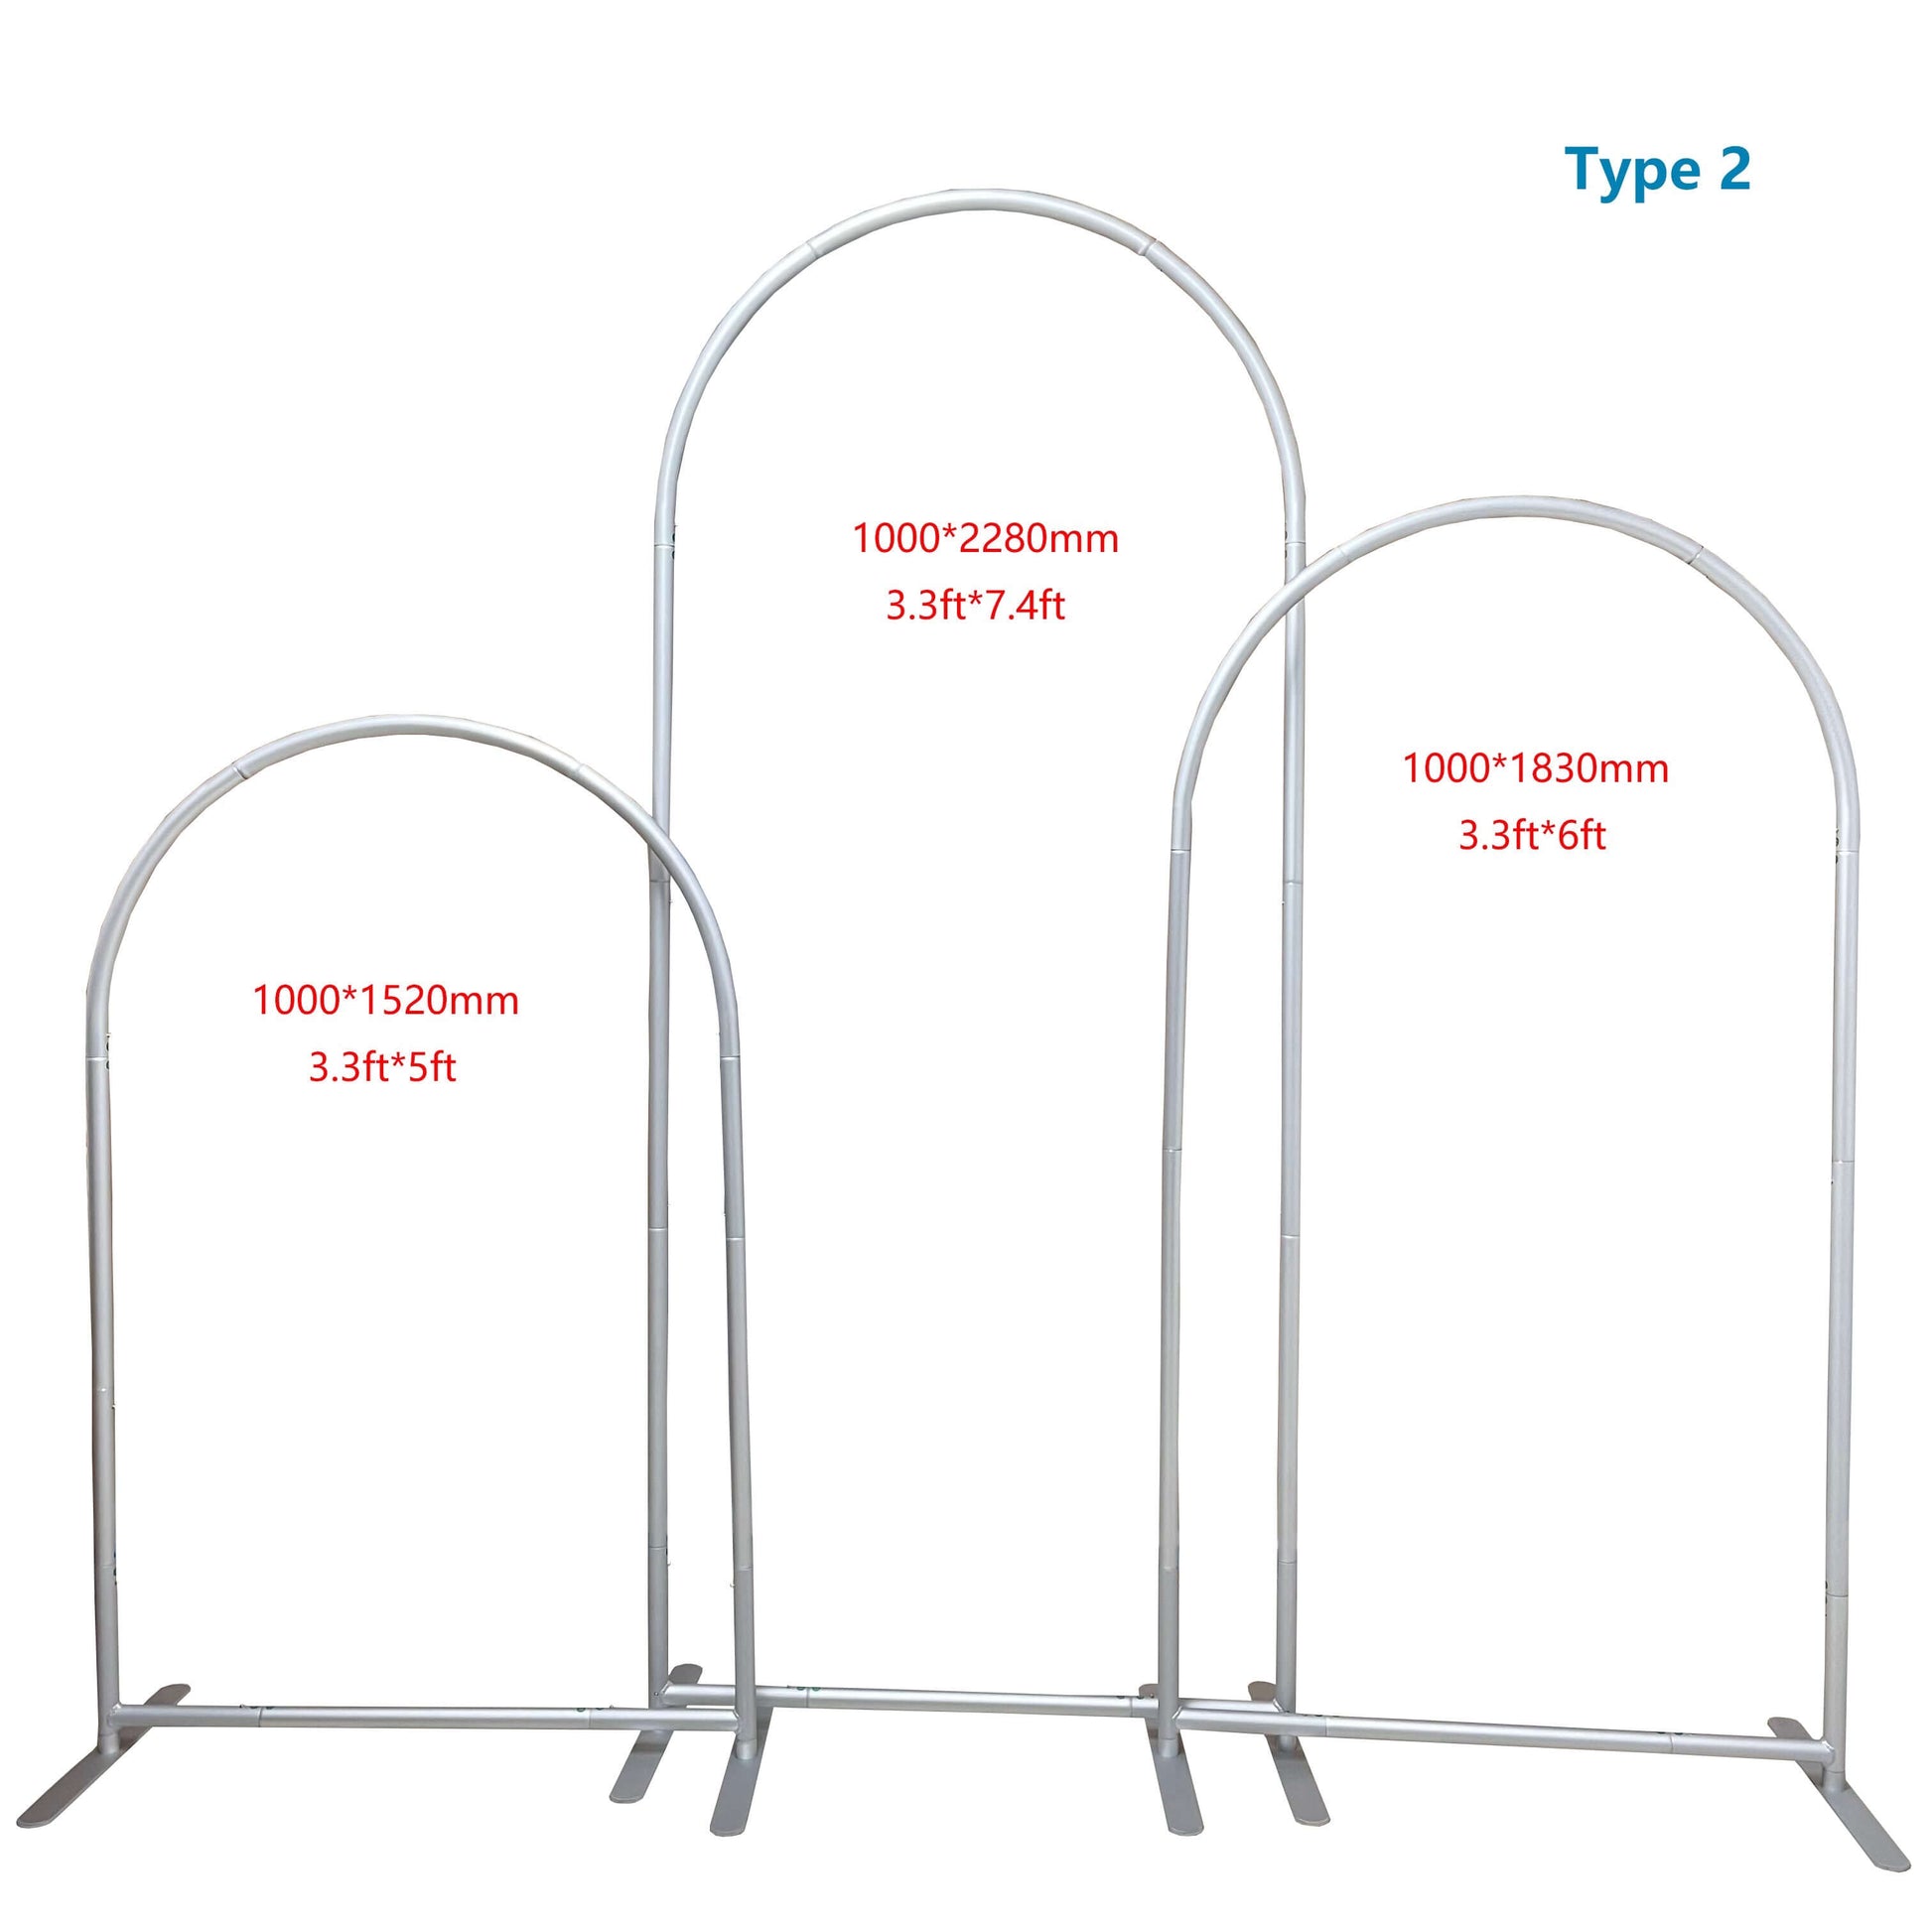 Chiara Arch Stand Frames 5X7Ft Open 3X4Ft 4X7Ft 3.3X5Ft+3.3X7.4Ft+3.3X6Ft Stands Party Backdrop